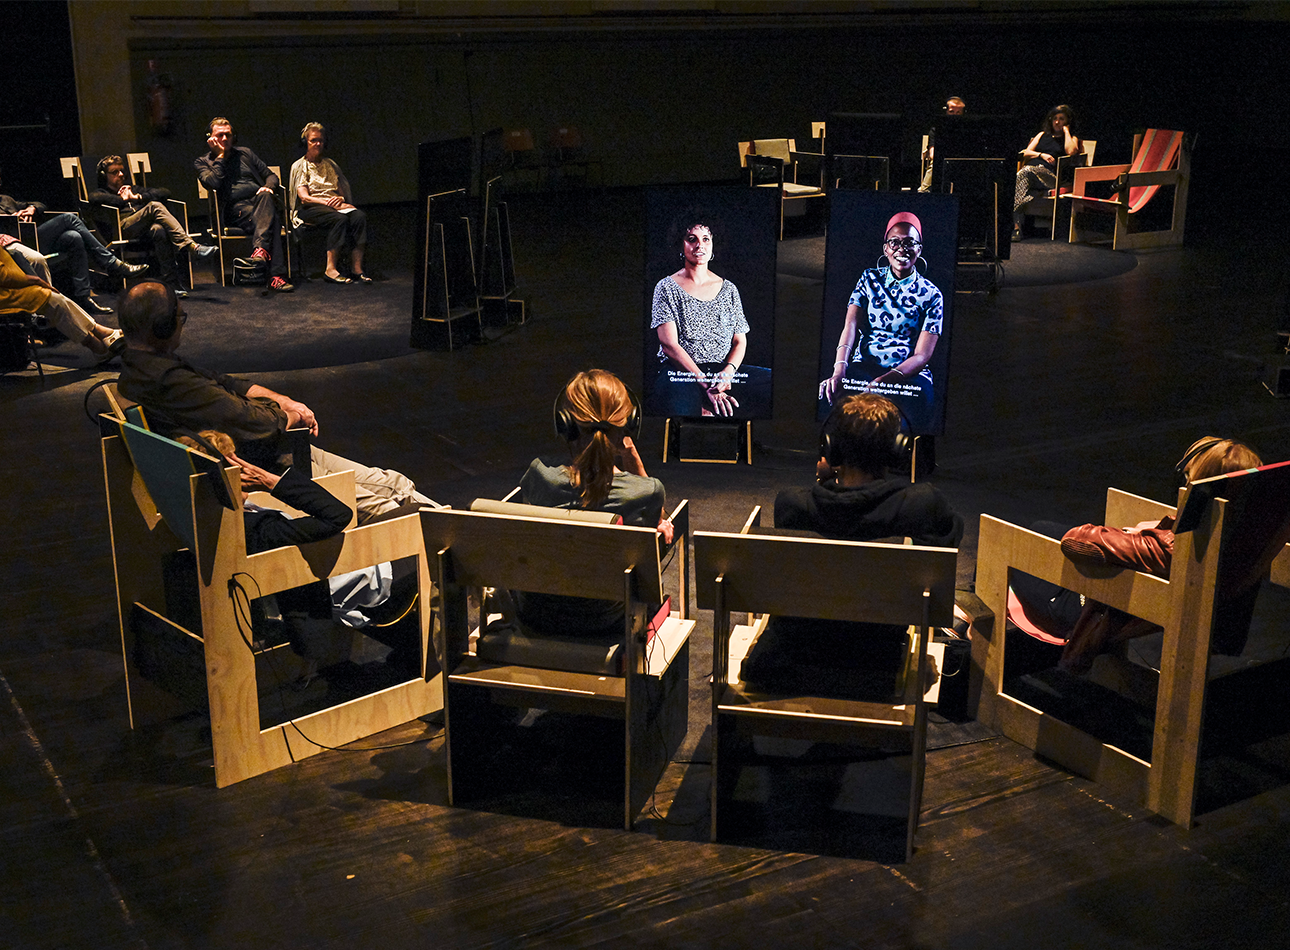 2 screens are set up in front of 4 chairs depicting 2 people. The same scene is replicated in the background.